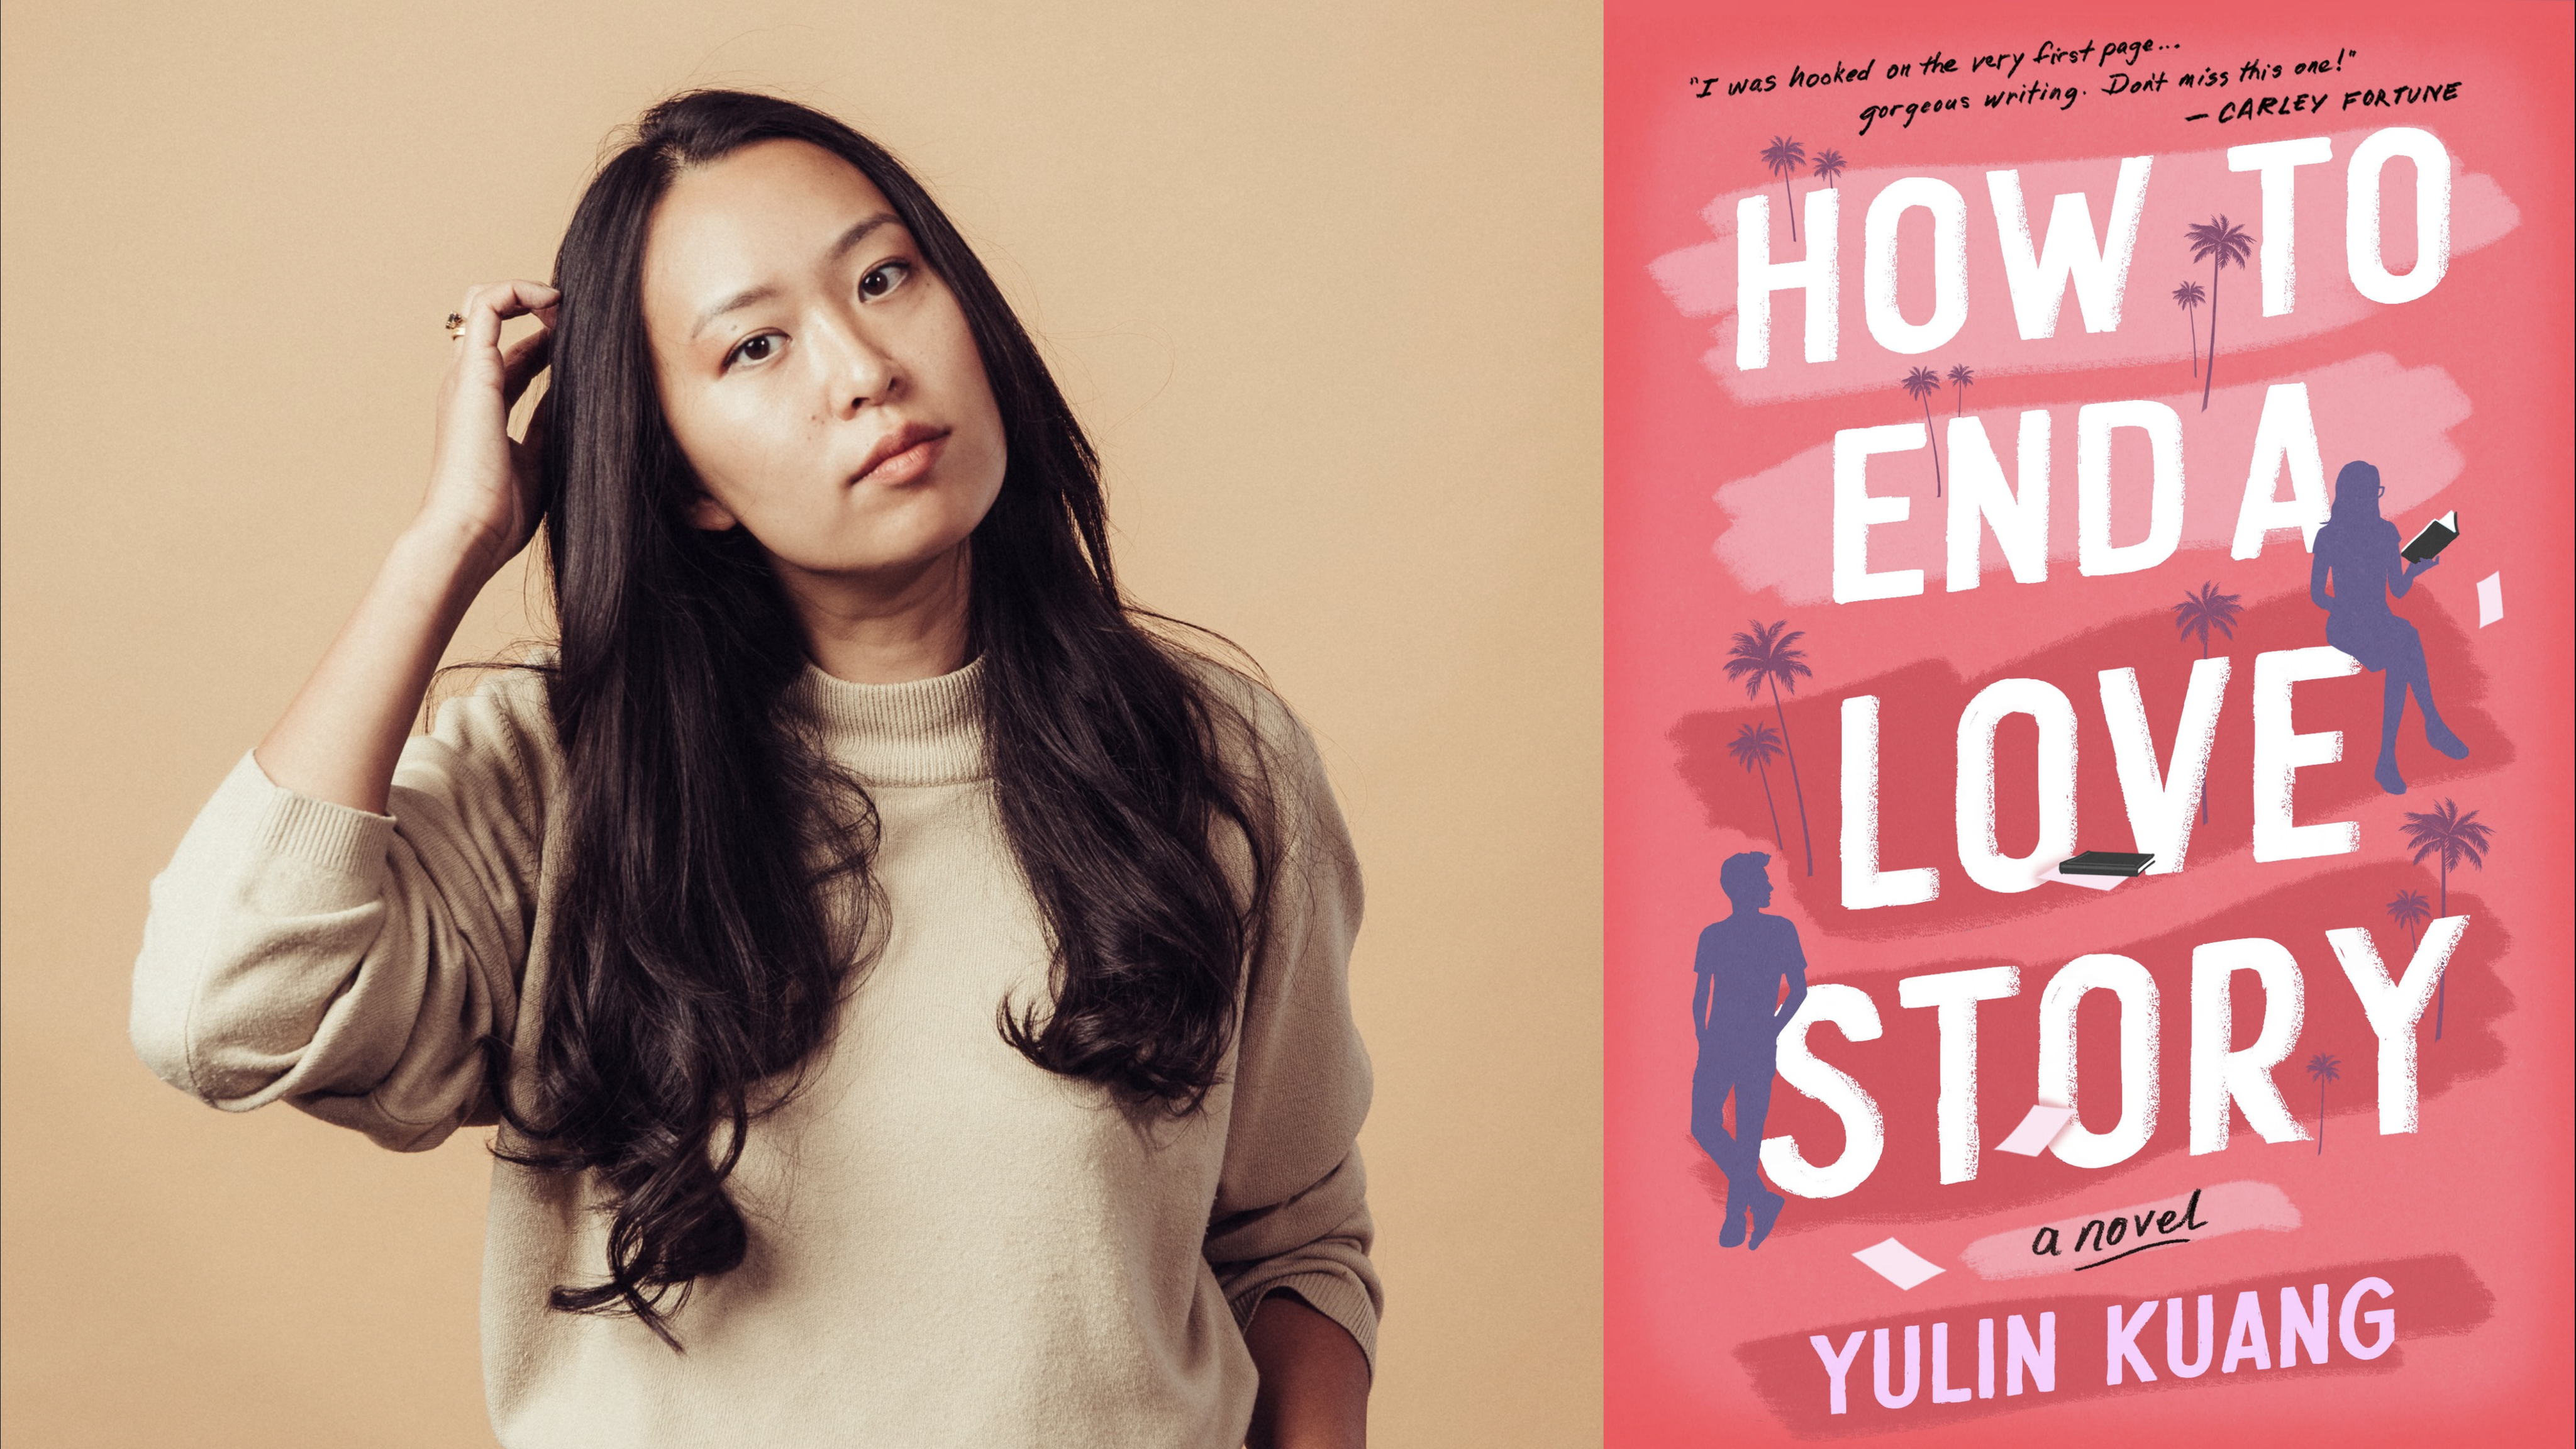 Author Yulin Kuang and the cover of her book "How to End a Love Story."